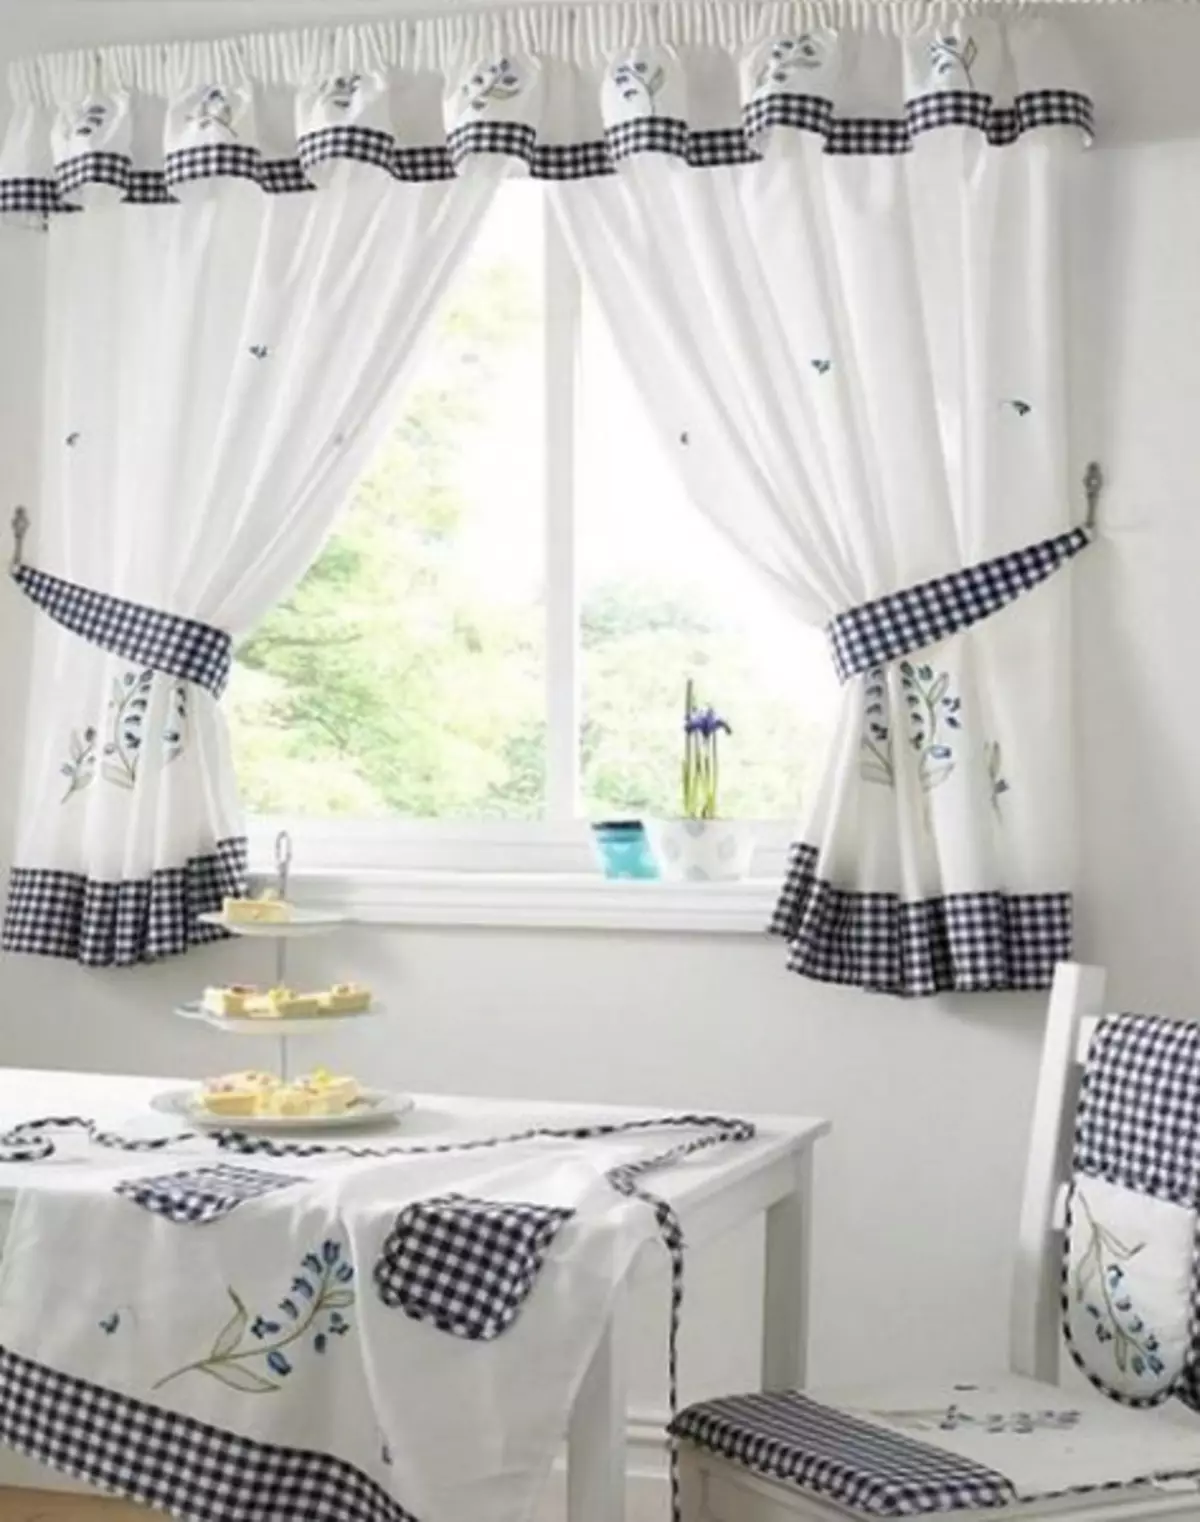 How to choose curtains or curtains for cottages